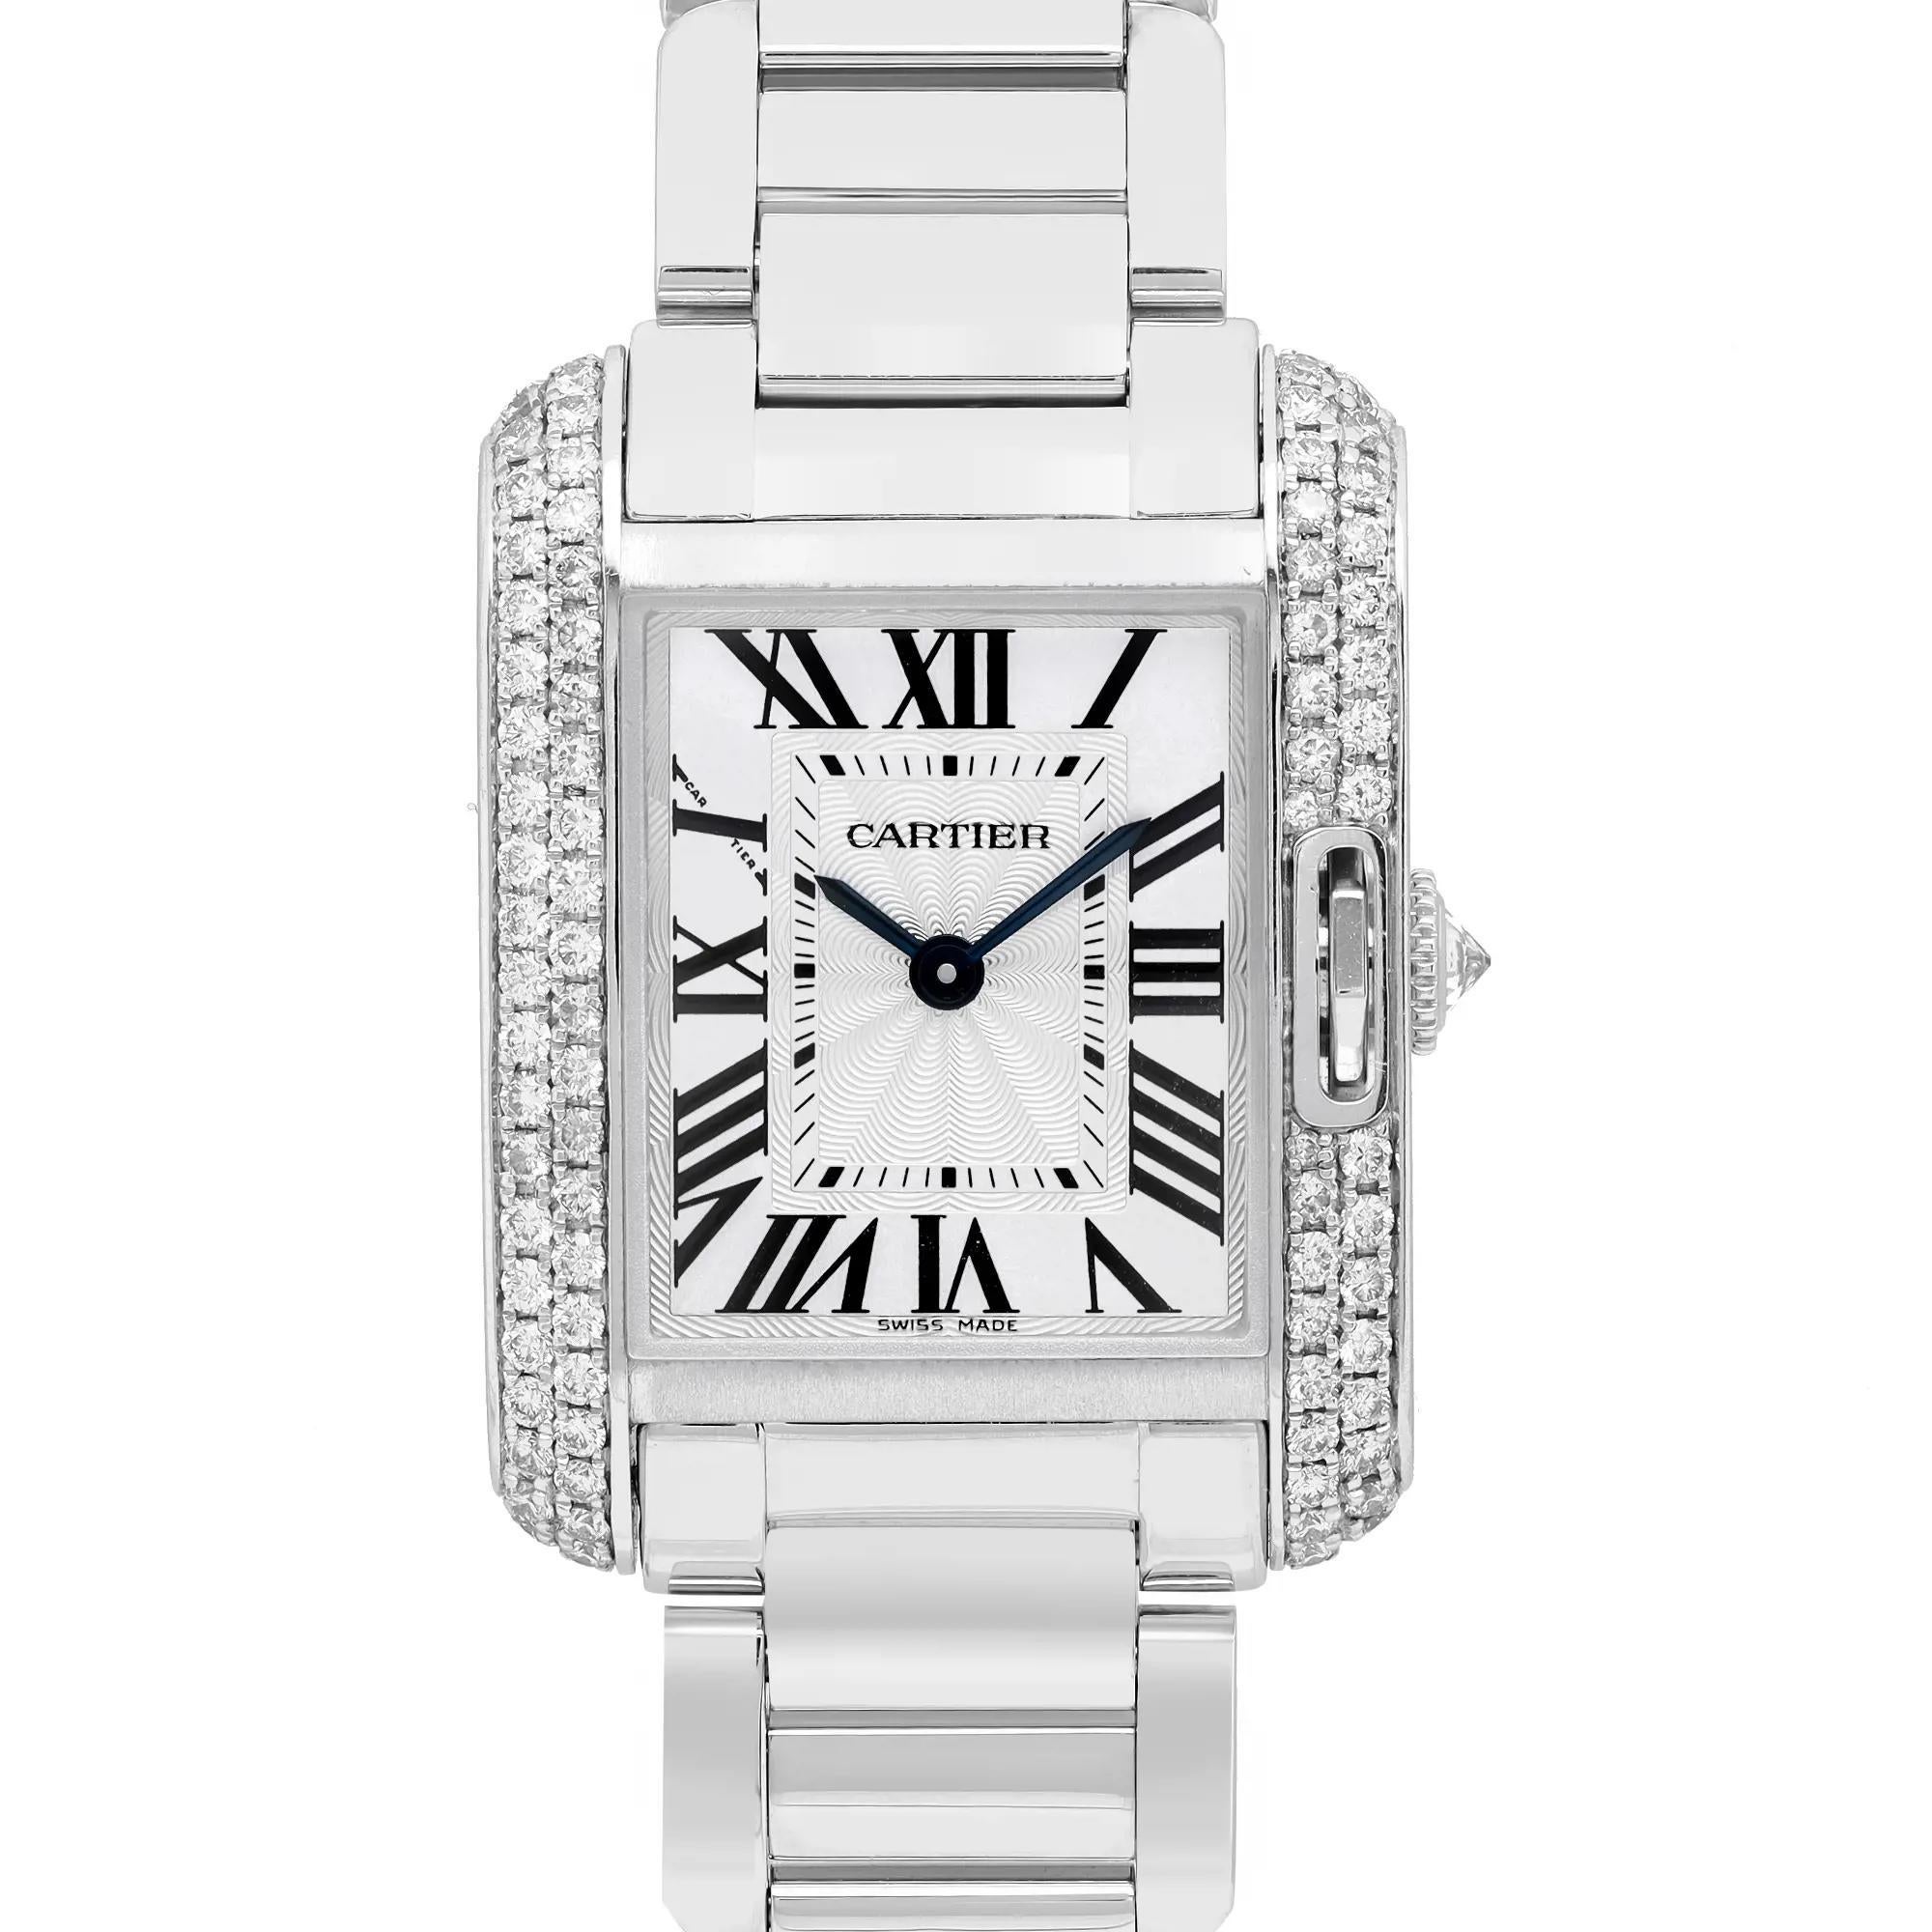 Factory Set Diamonds. Can have minor scratches and handling marks During handling and shipping.  Case size: 30.2 mm x 22.7 mm. Comes with an original box and manuals but papers are not included.

Brand: Cartier  Type: Wristwatch  Department: Women 